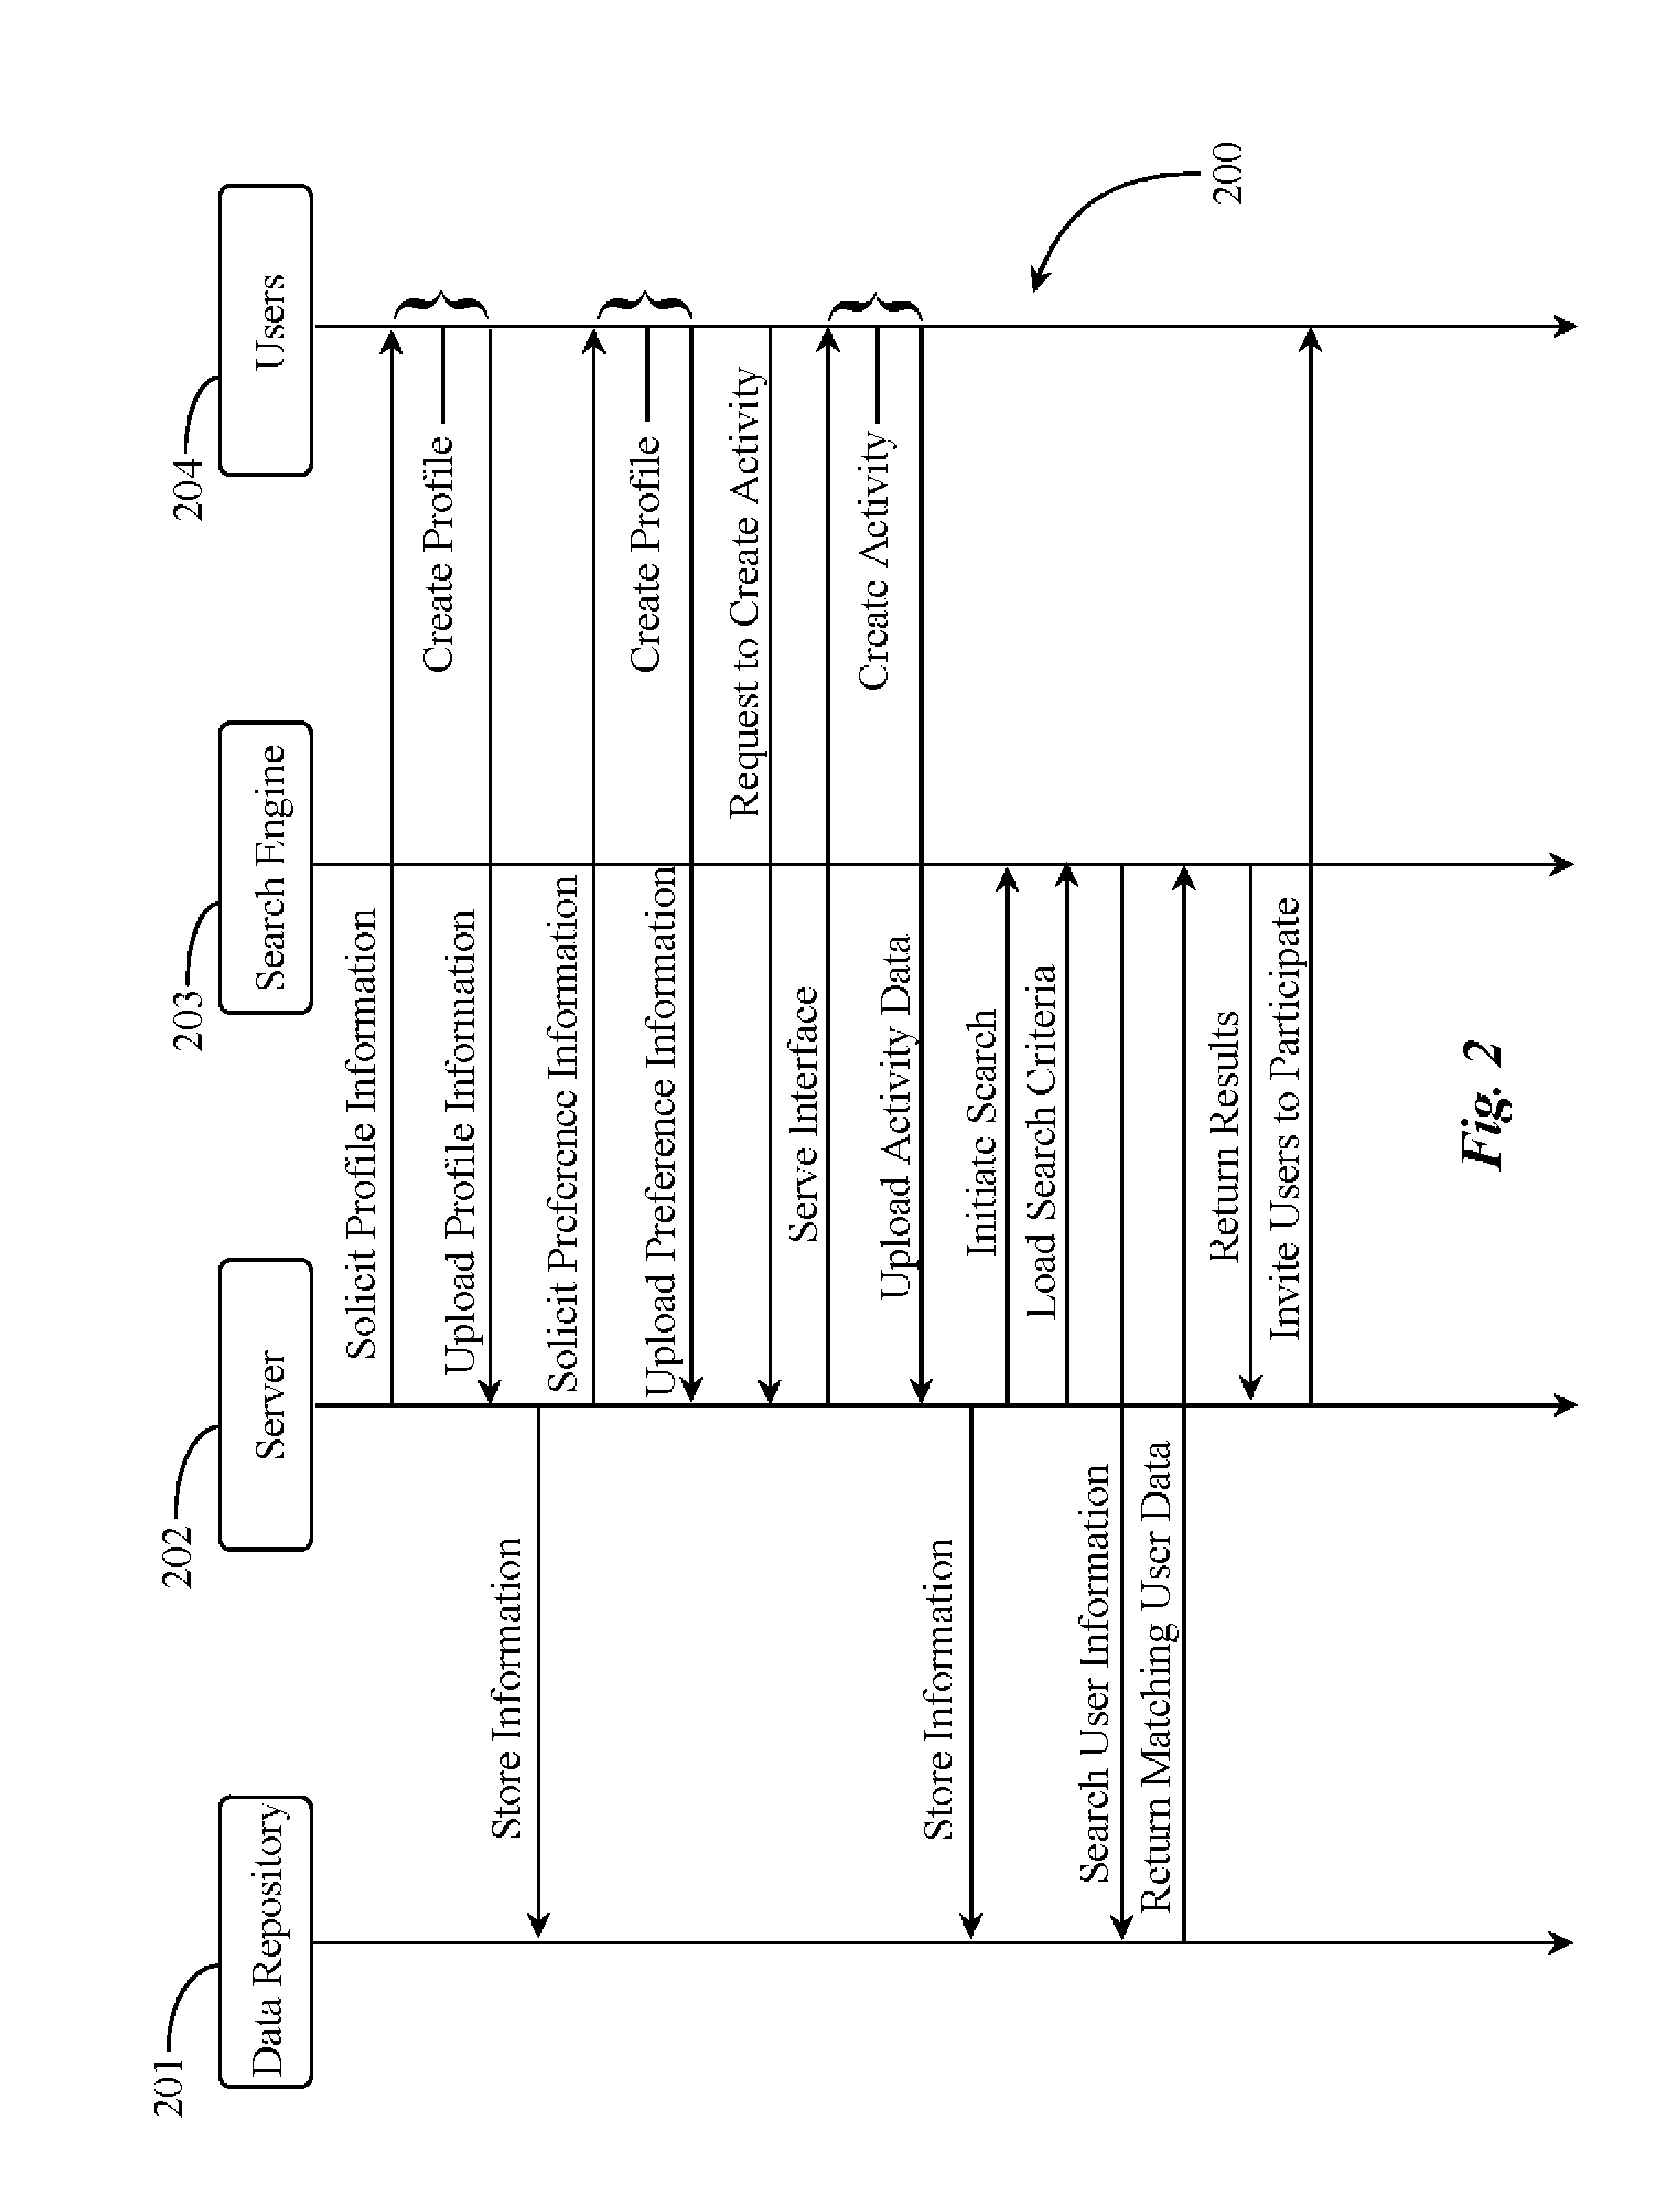 Systems and methods for creating and managing group activities over a data network